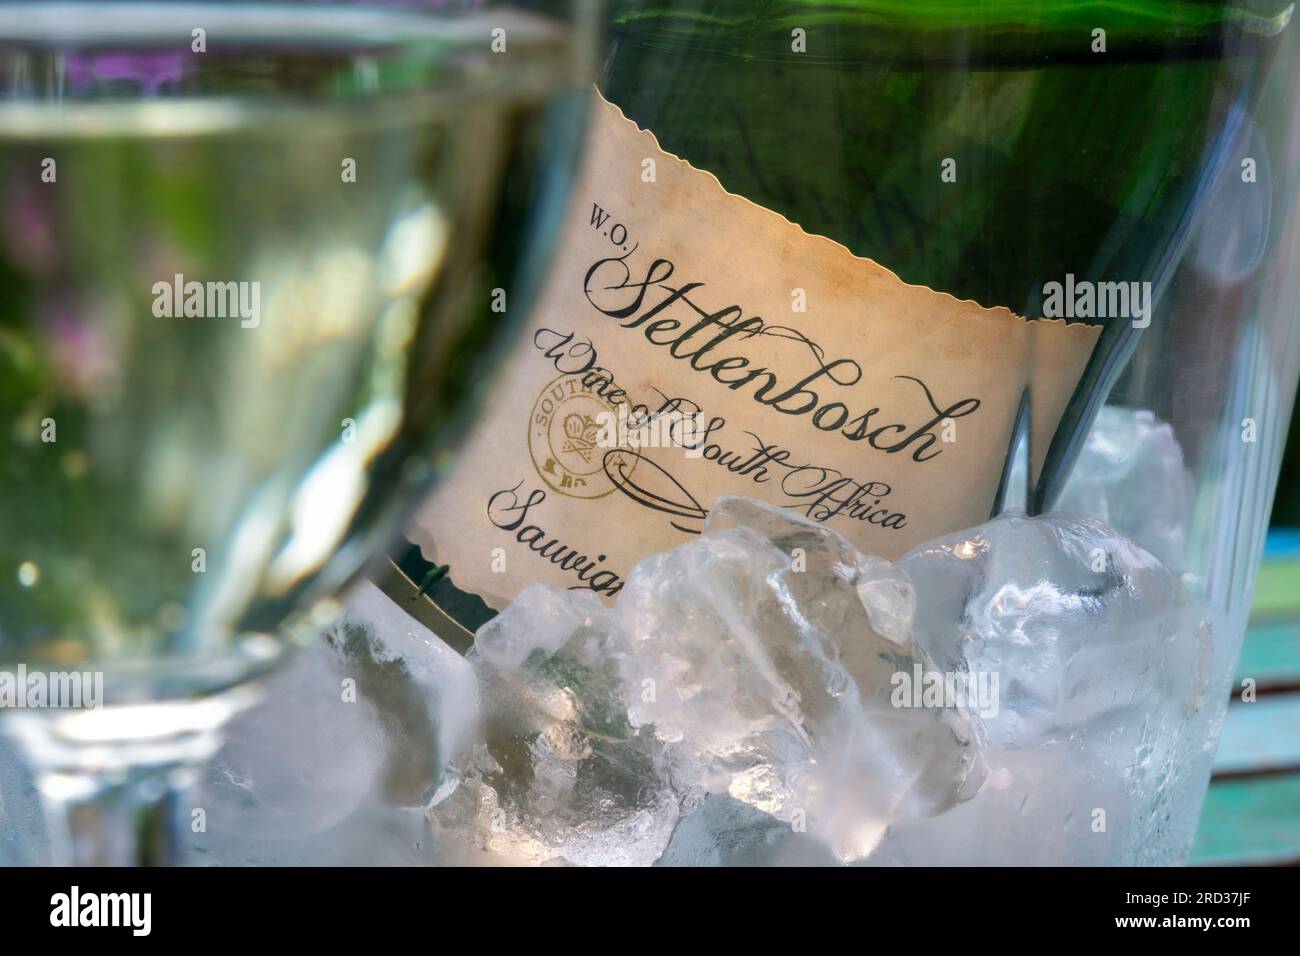 Stellenbosch South Africa white wine Sauvignon Blanc bottle and label close up in ice cooler with wine glass in sunny alfresco garden situation Stock Photo